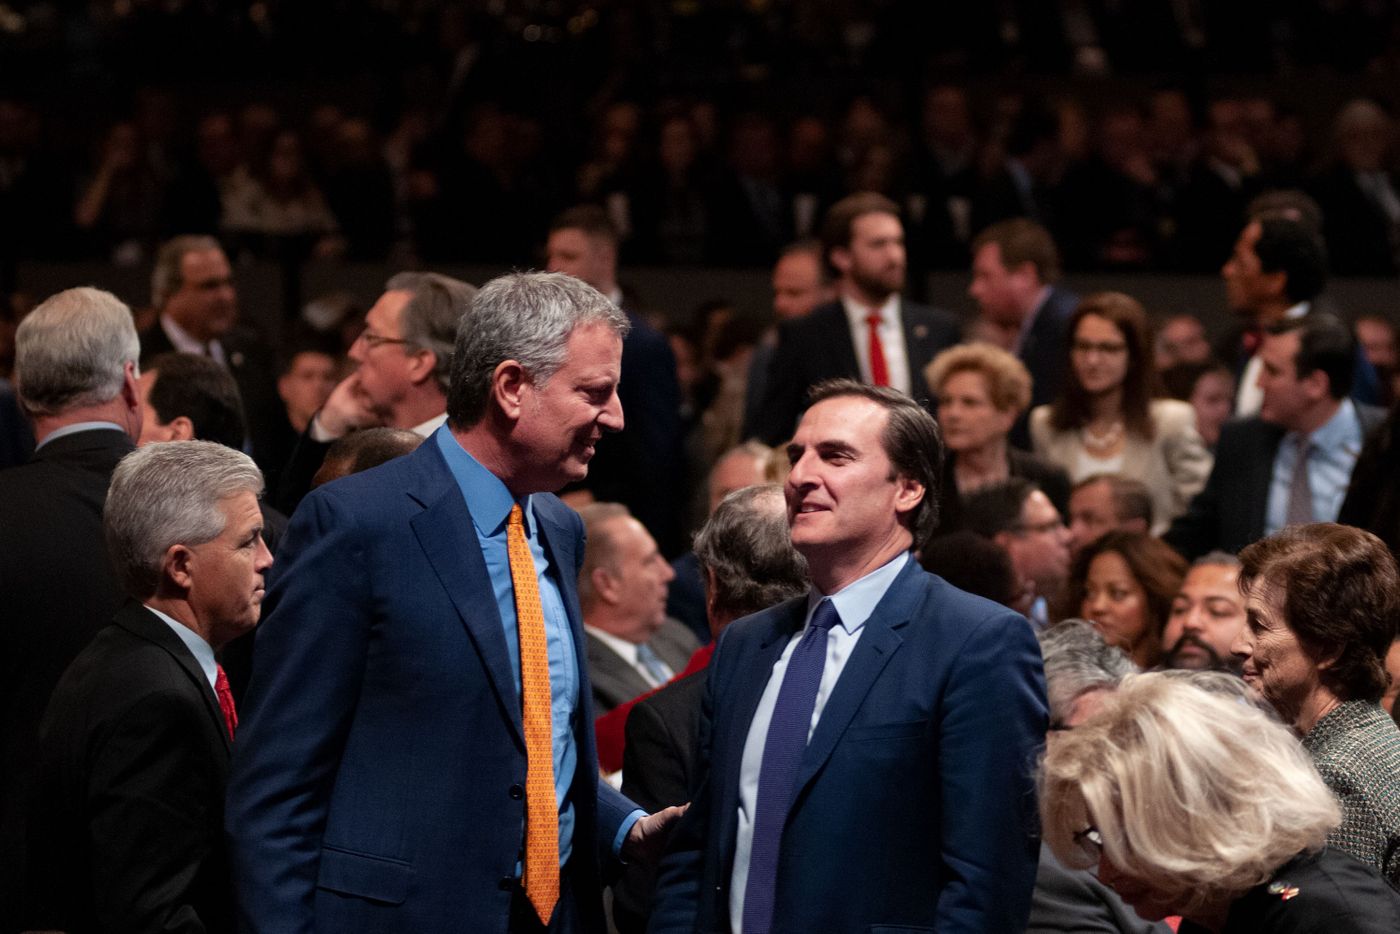 Mayor Bill de Blasio speaks with State Sen. Mike Gianaris (D-Queens) during the 2020 State of the State address in Albany, Jan. 8, 2020.